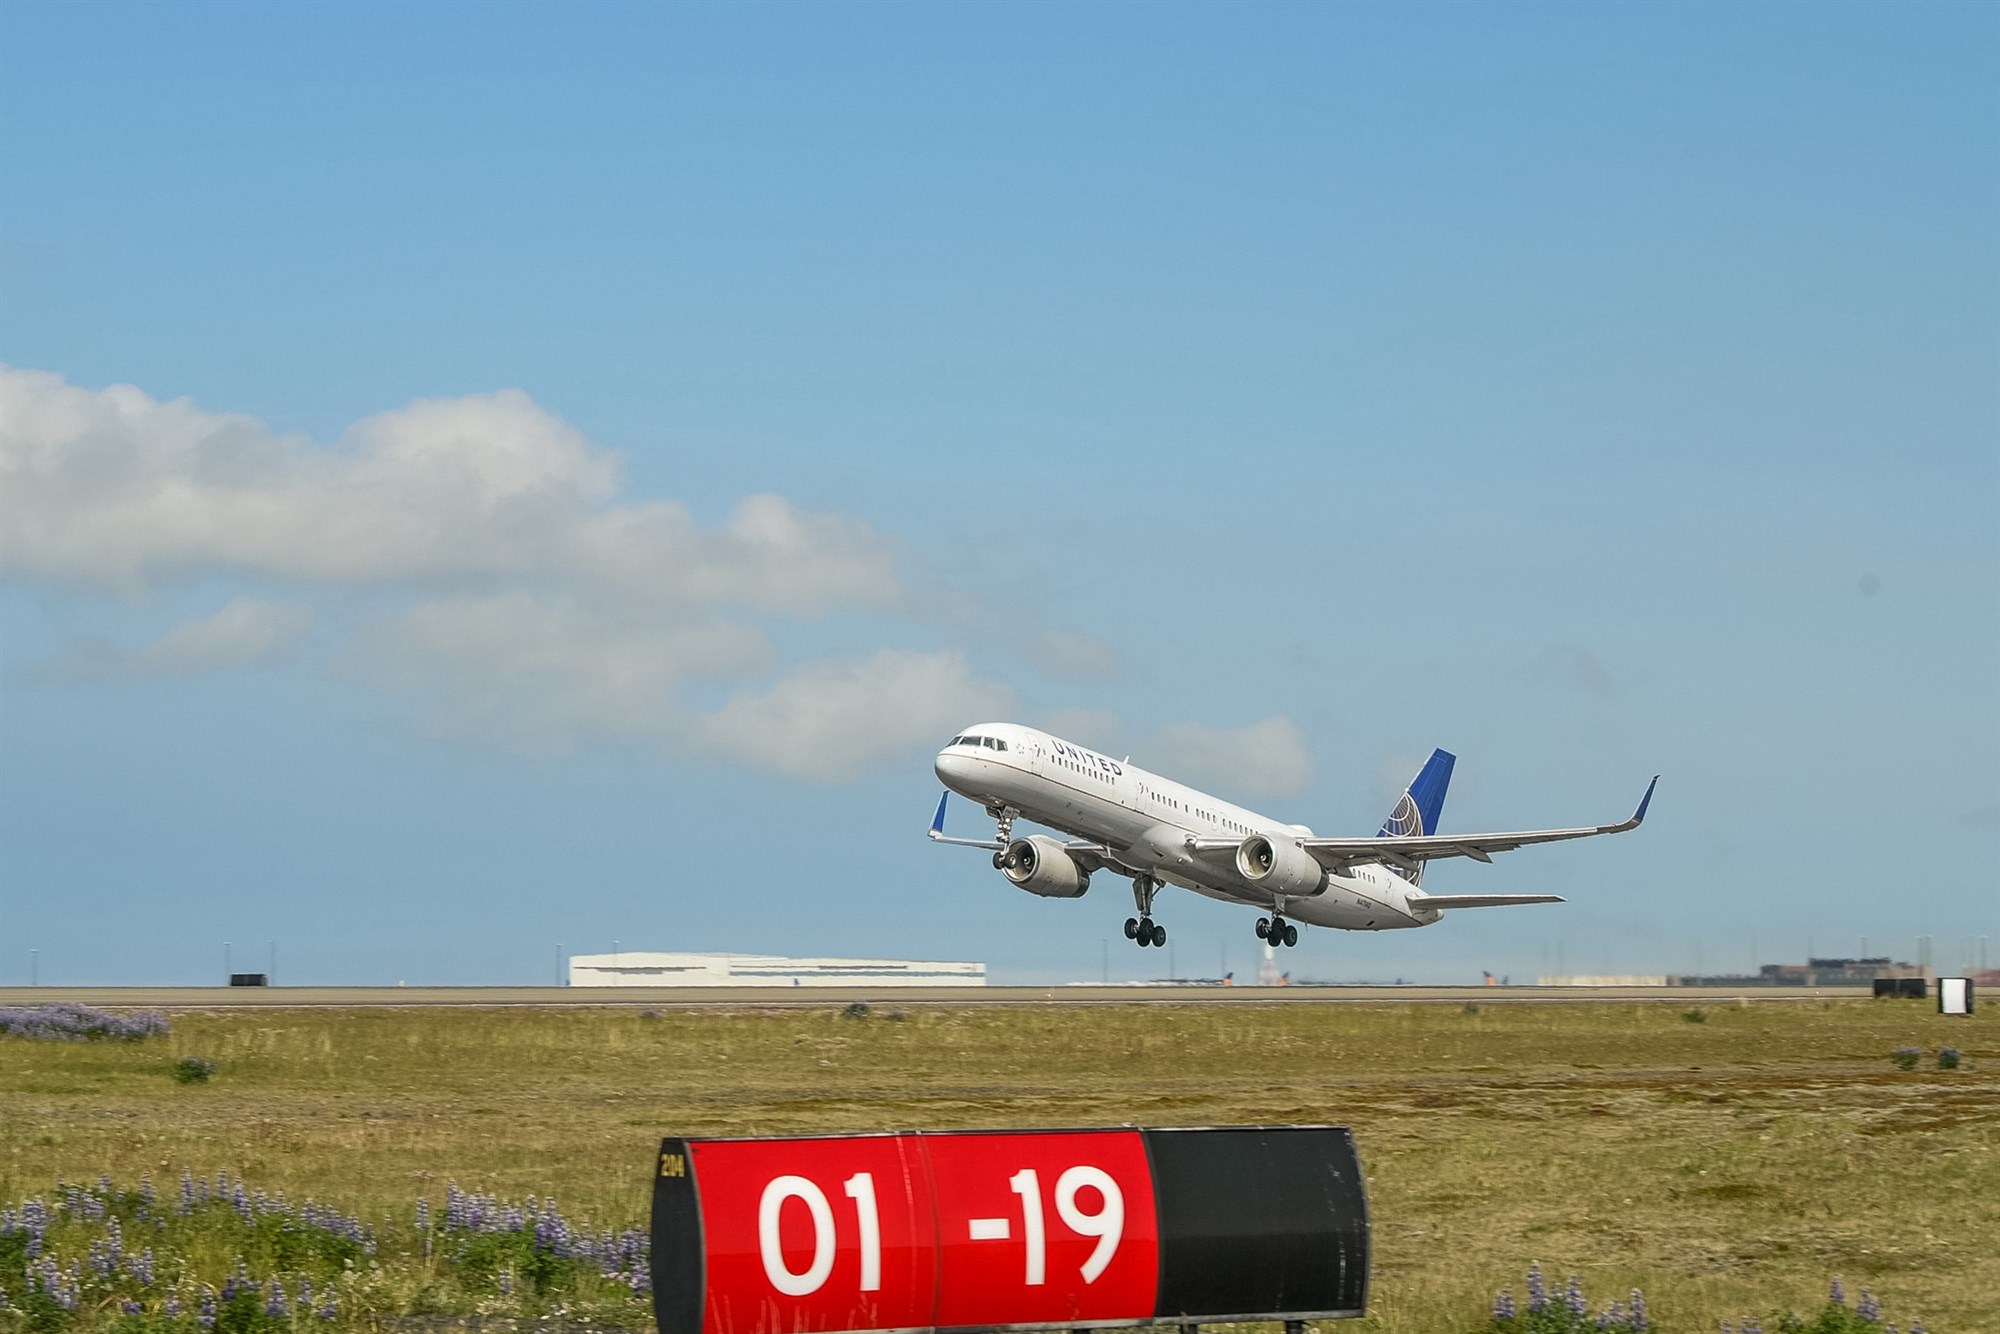 United Airlines Inaugurates Nonstop Daily Service Between Keflavik Airport and Chicago